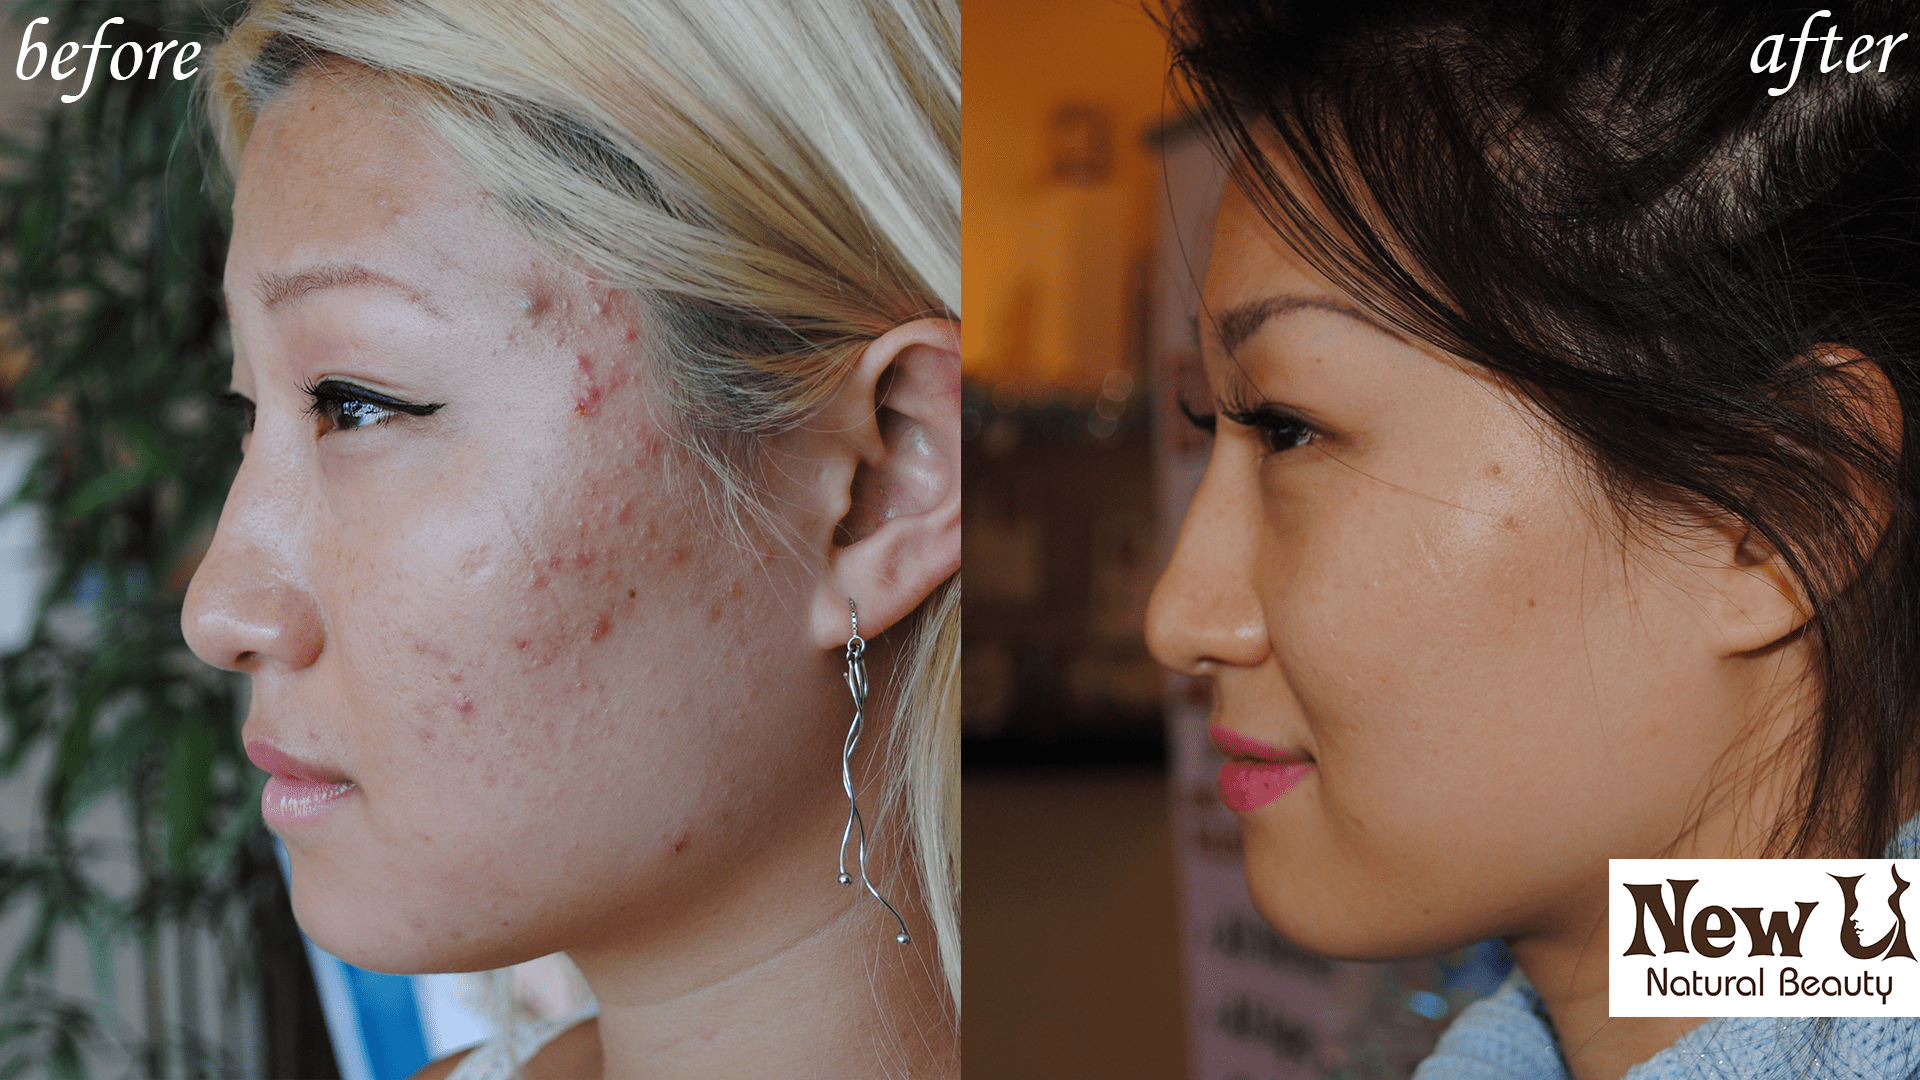 Acne Treatment 4 Las Vegas Before and After